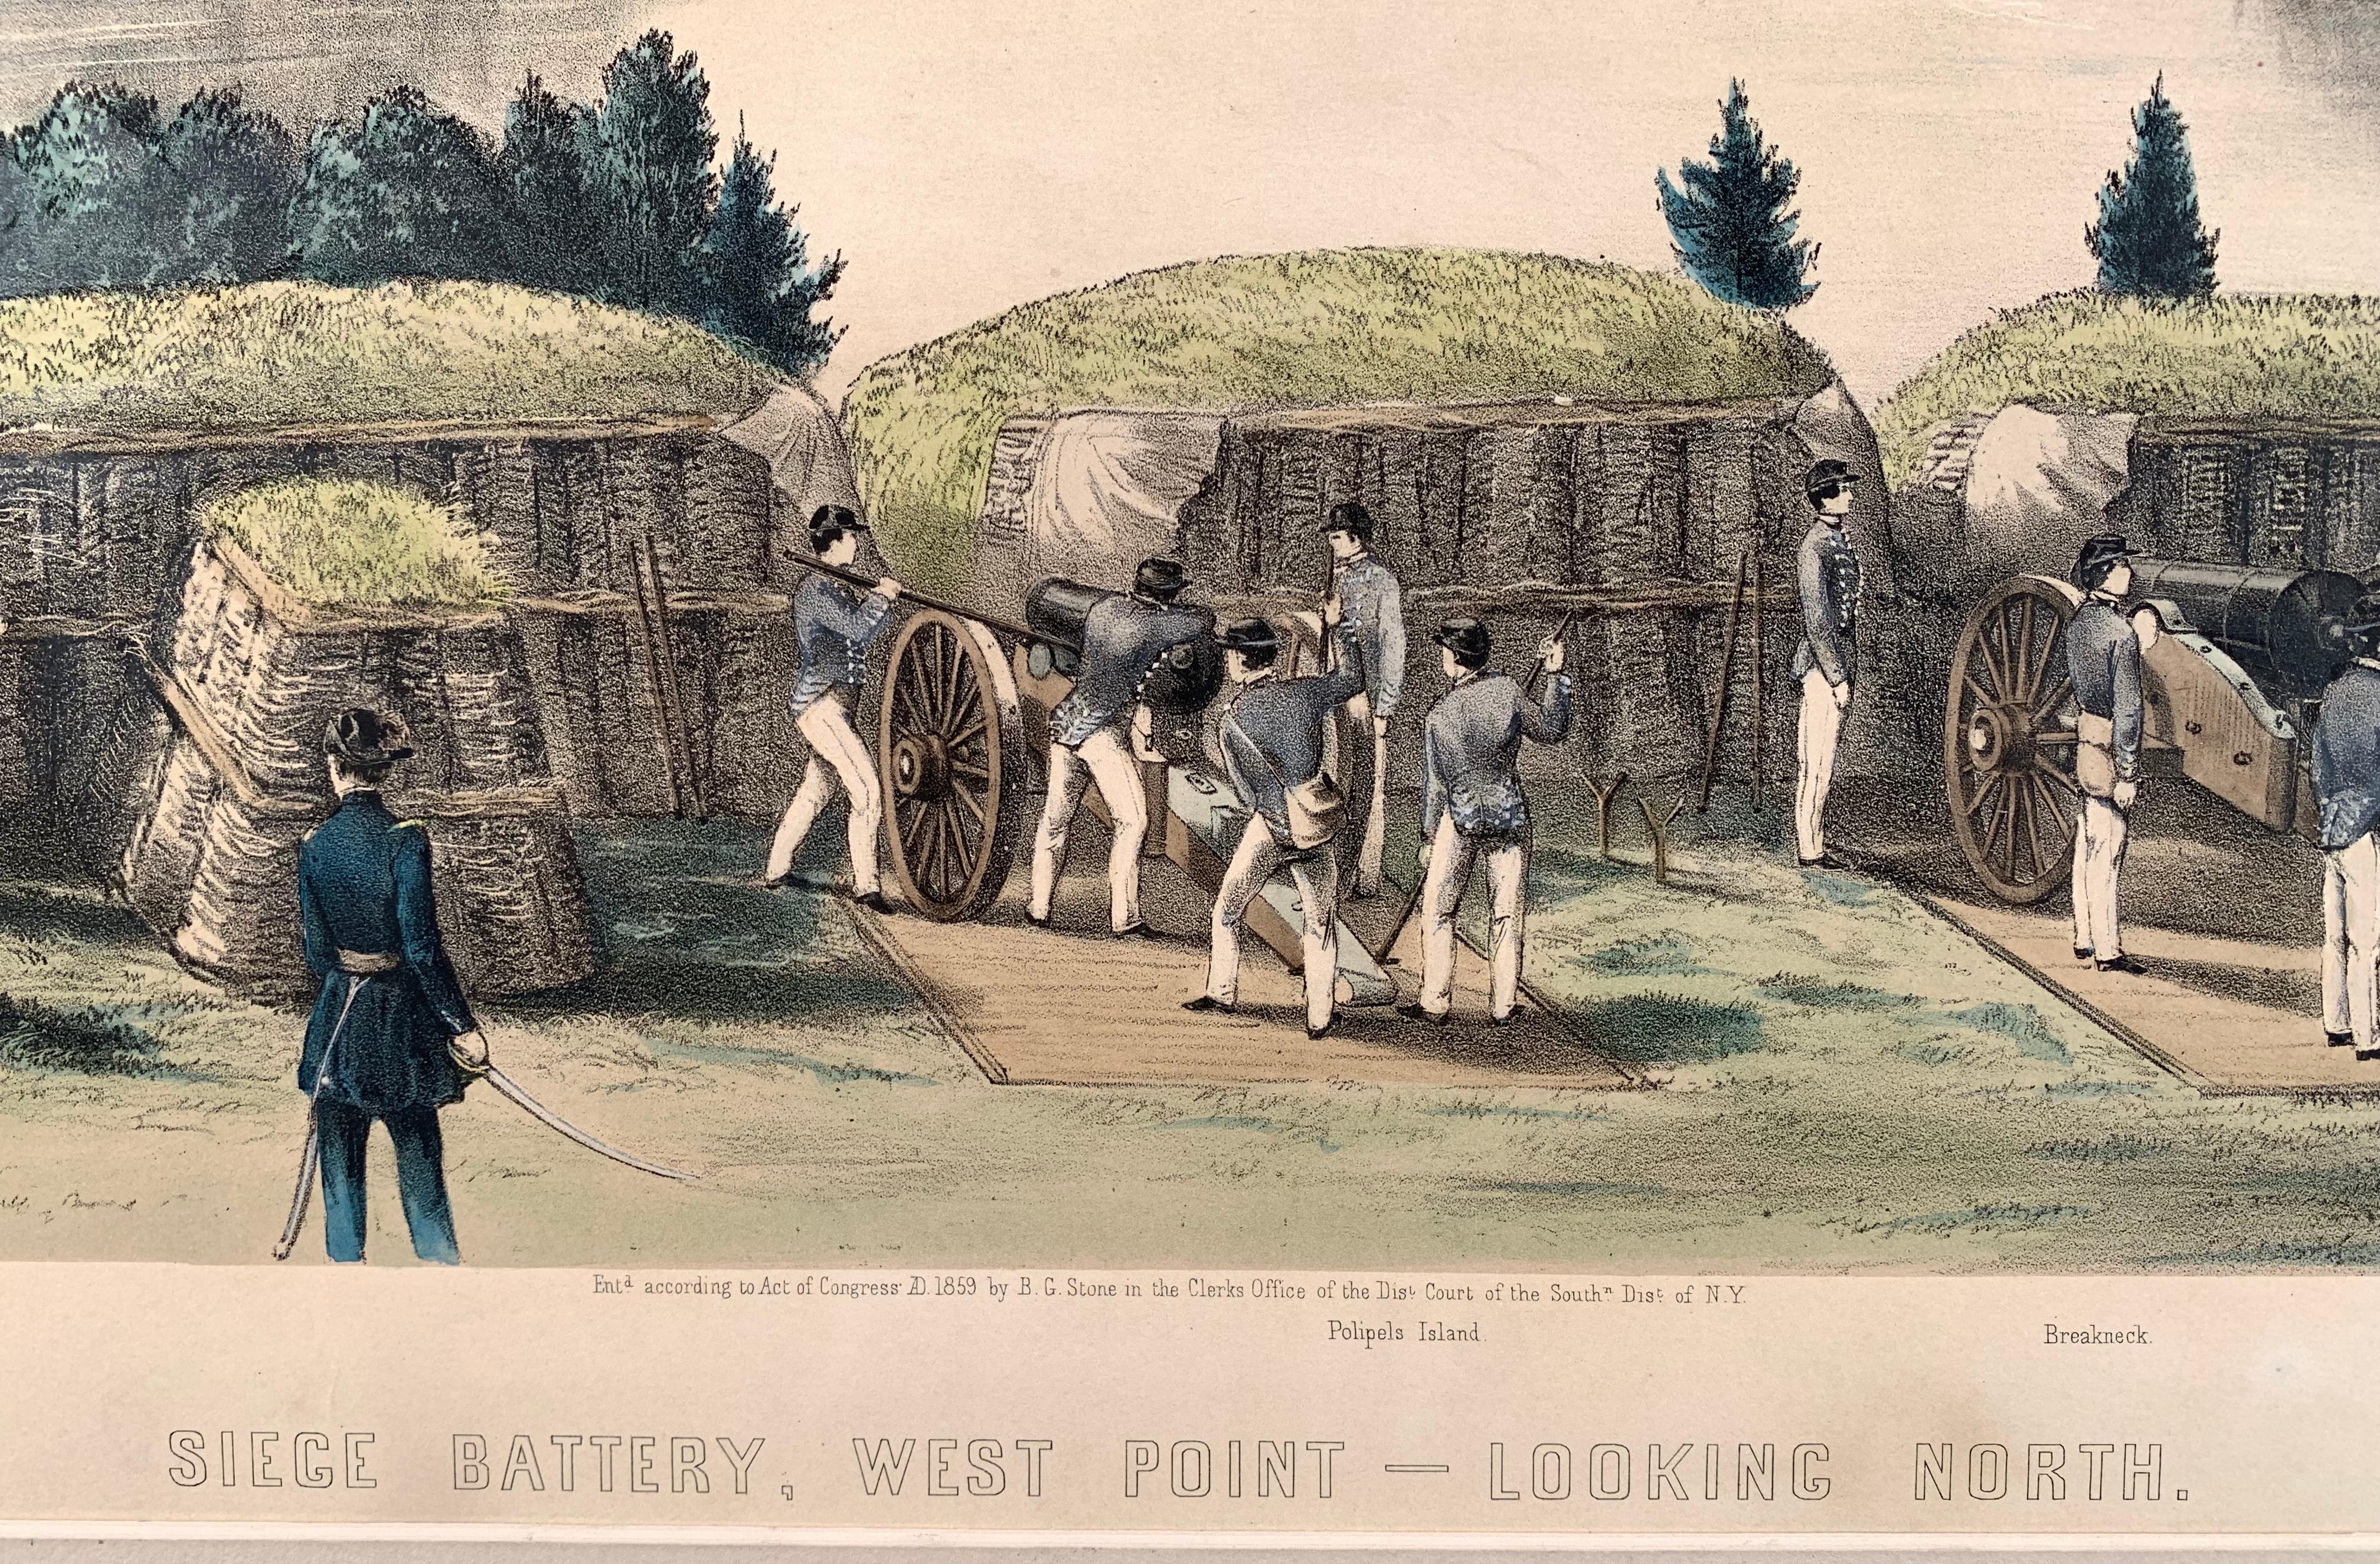 Siege Battery, West Point - Looking North - Print by Charles Parsons